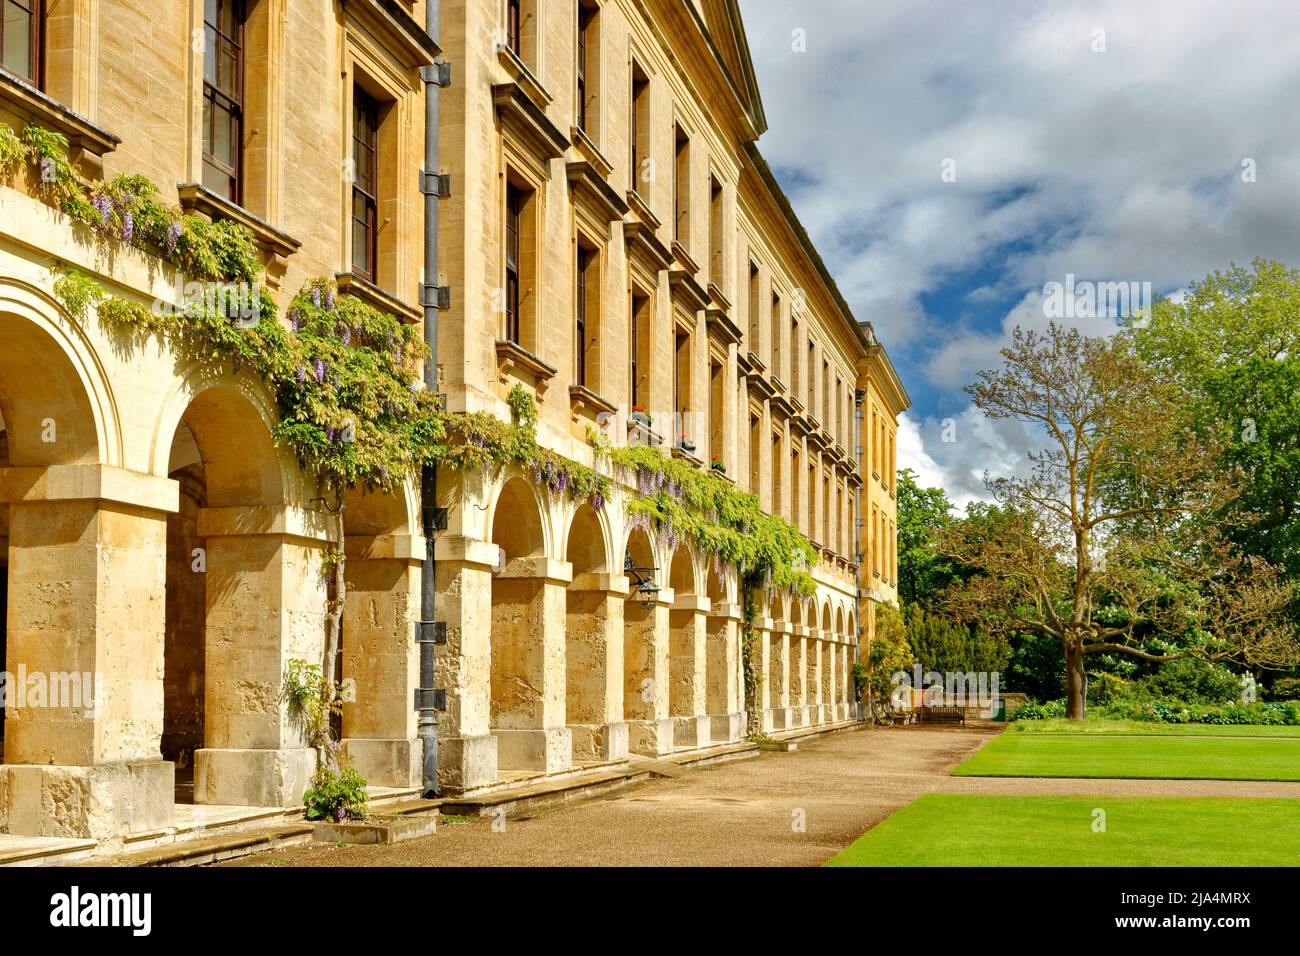 OXFORD CITY ENGLAND MAGDALEN COLLEGE THE EMPRESS TREE AND WISTERIA AND FLOWERS ON THE WALL OF THE NEW BUILDING Stock Photo